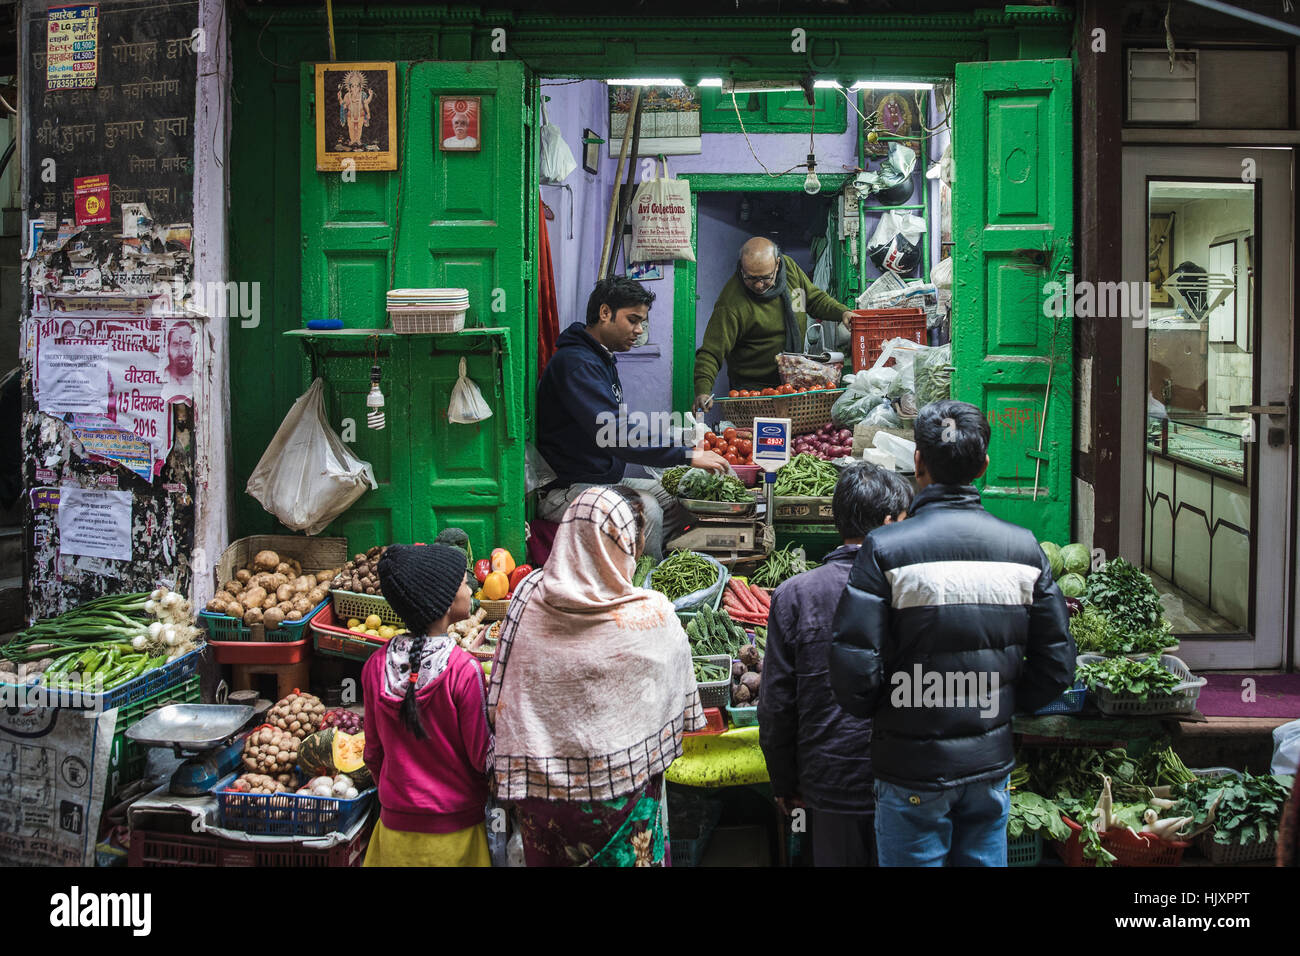 People buying groceries from a fruit and vegetable seller in Chandni Chowk, New Delhi, India. Stock Photo